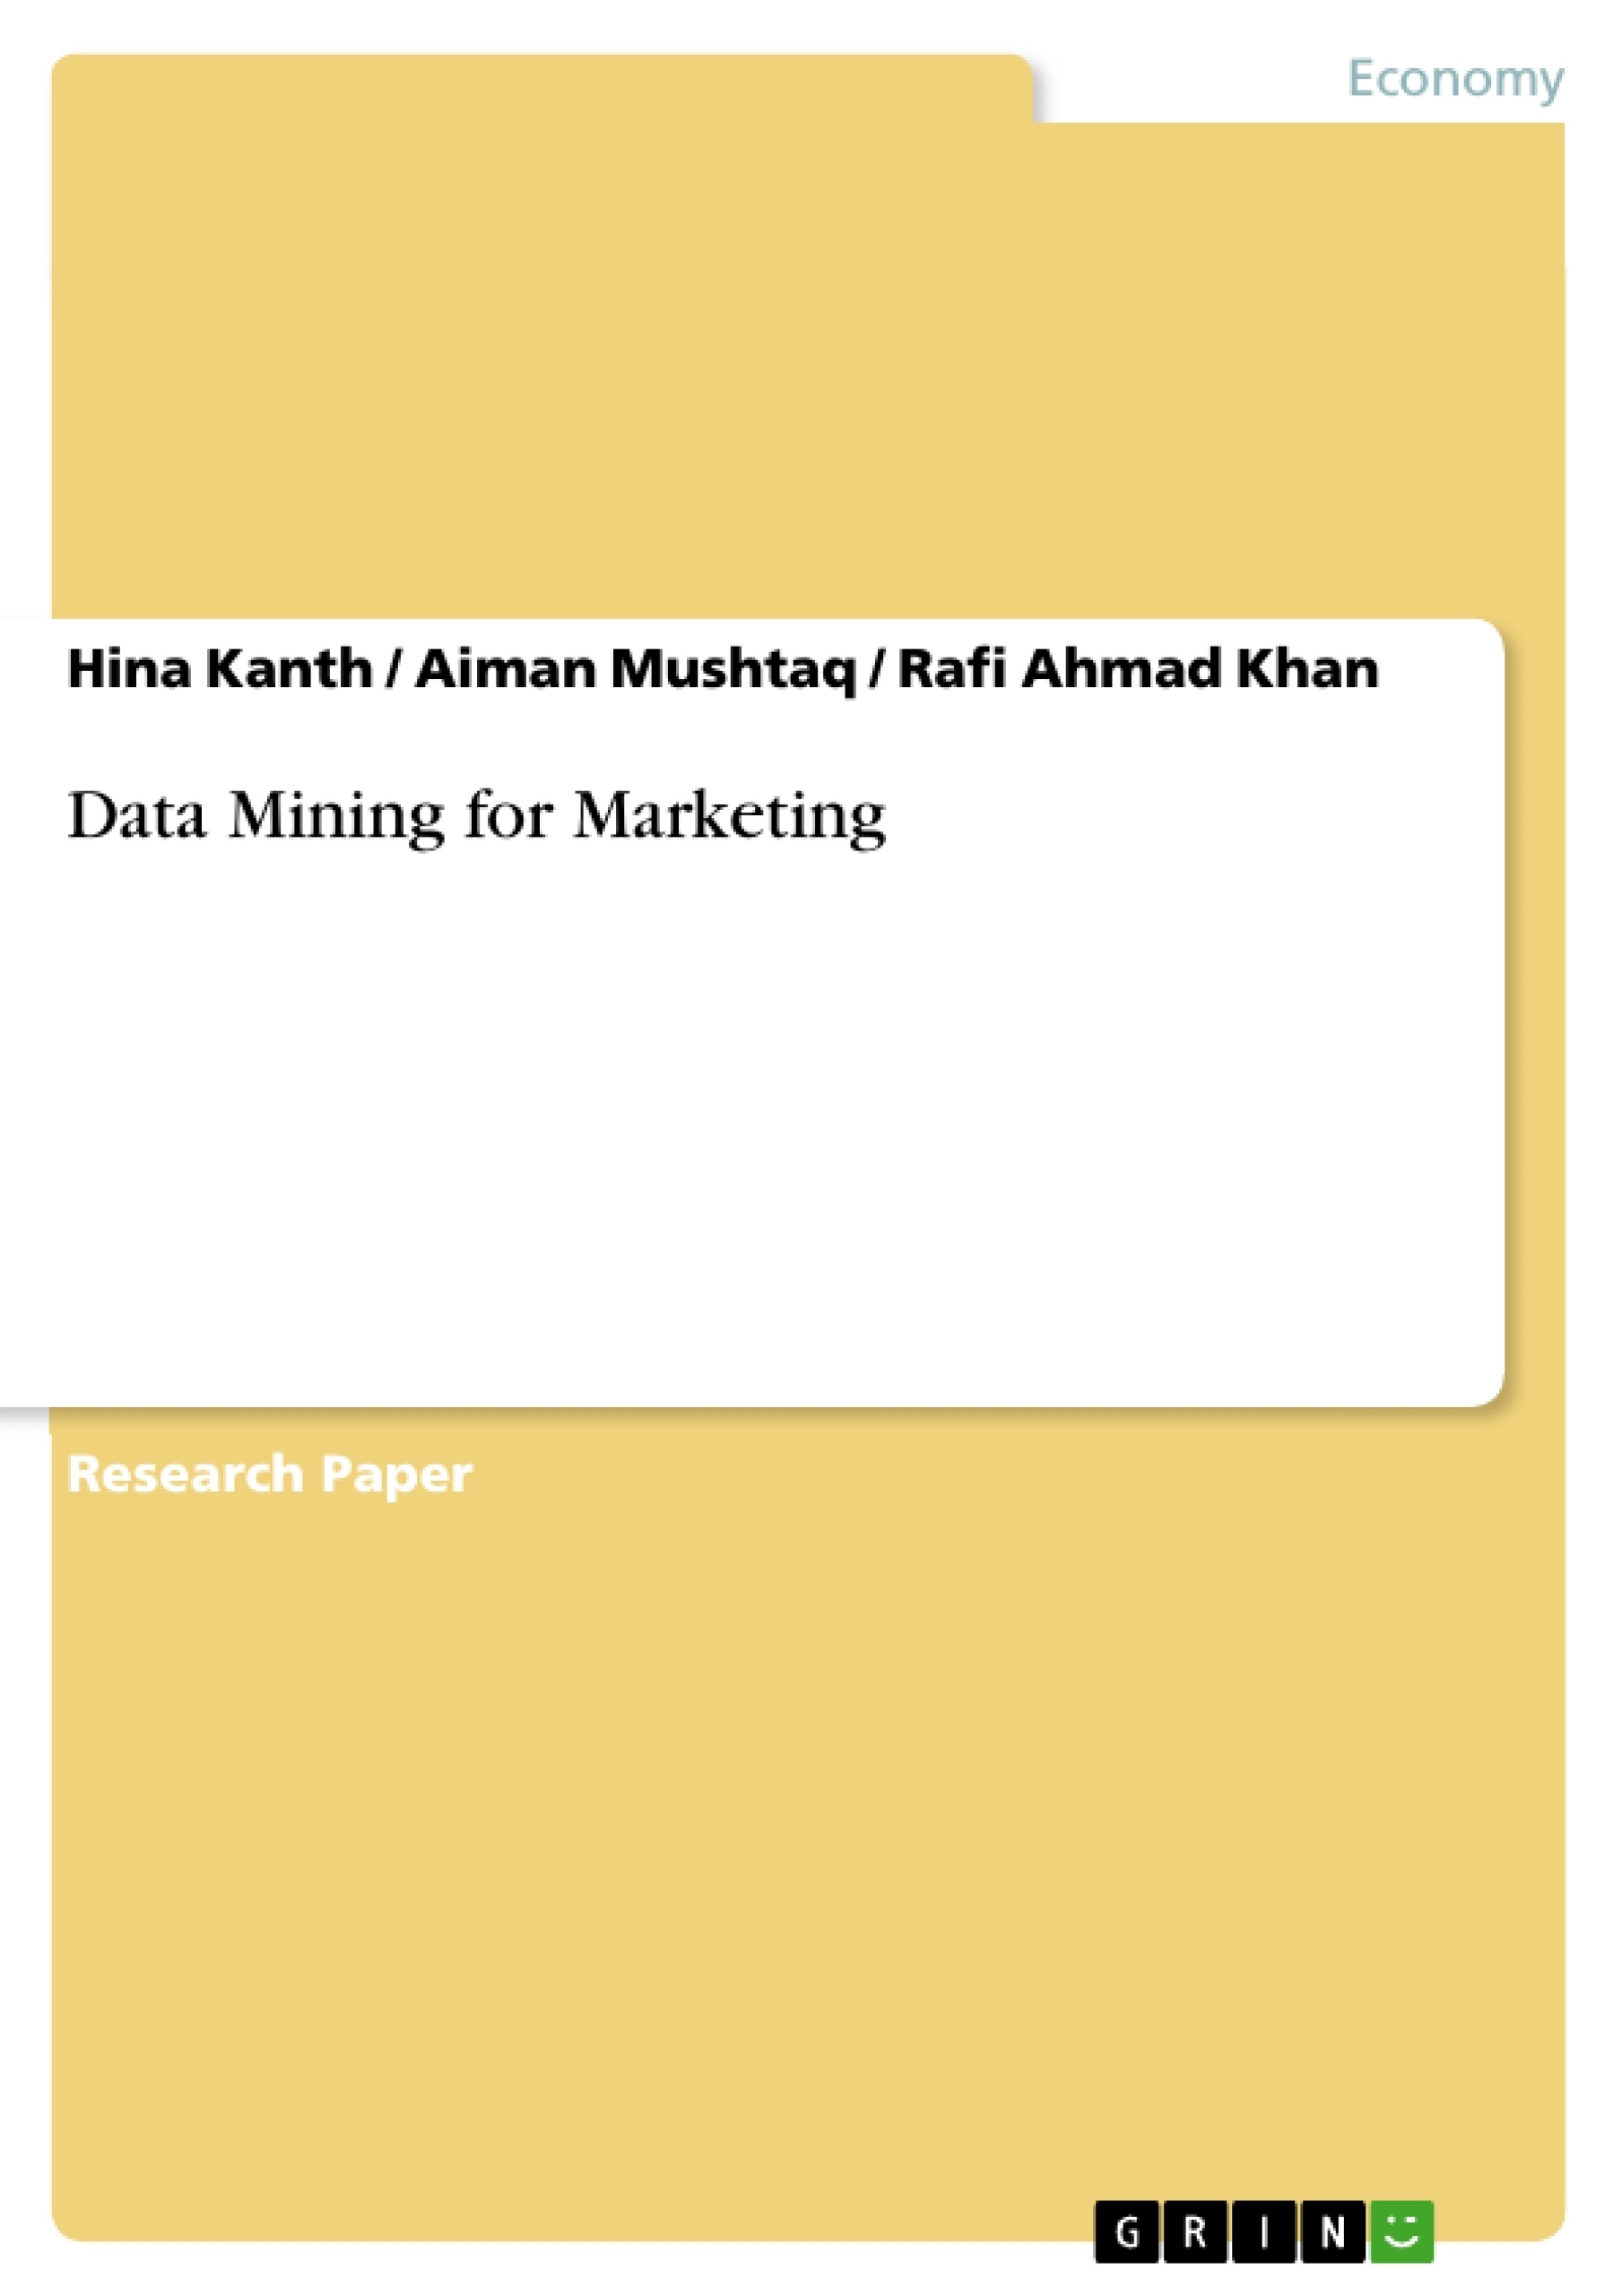 Research Paper on Data Mining